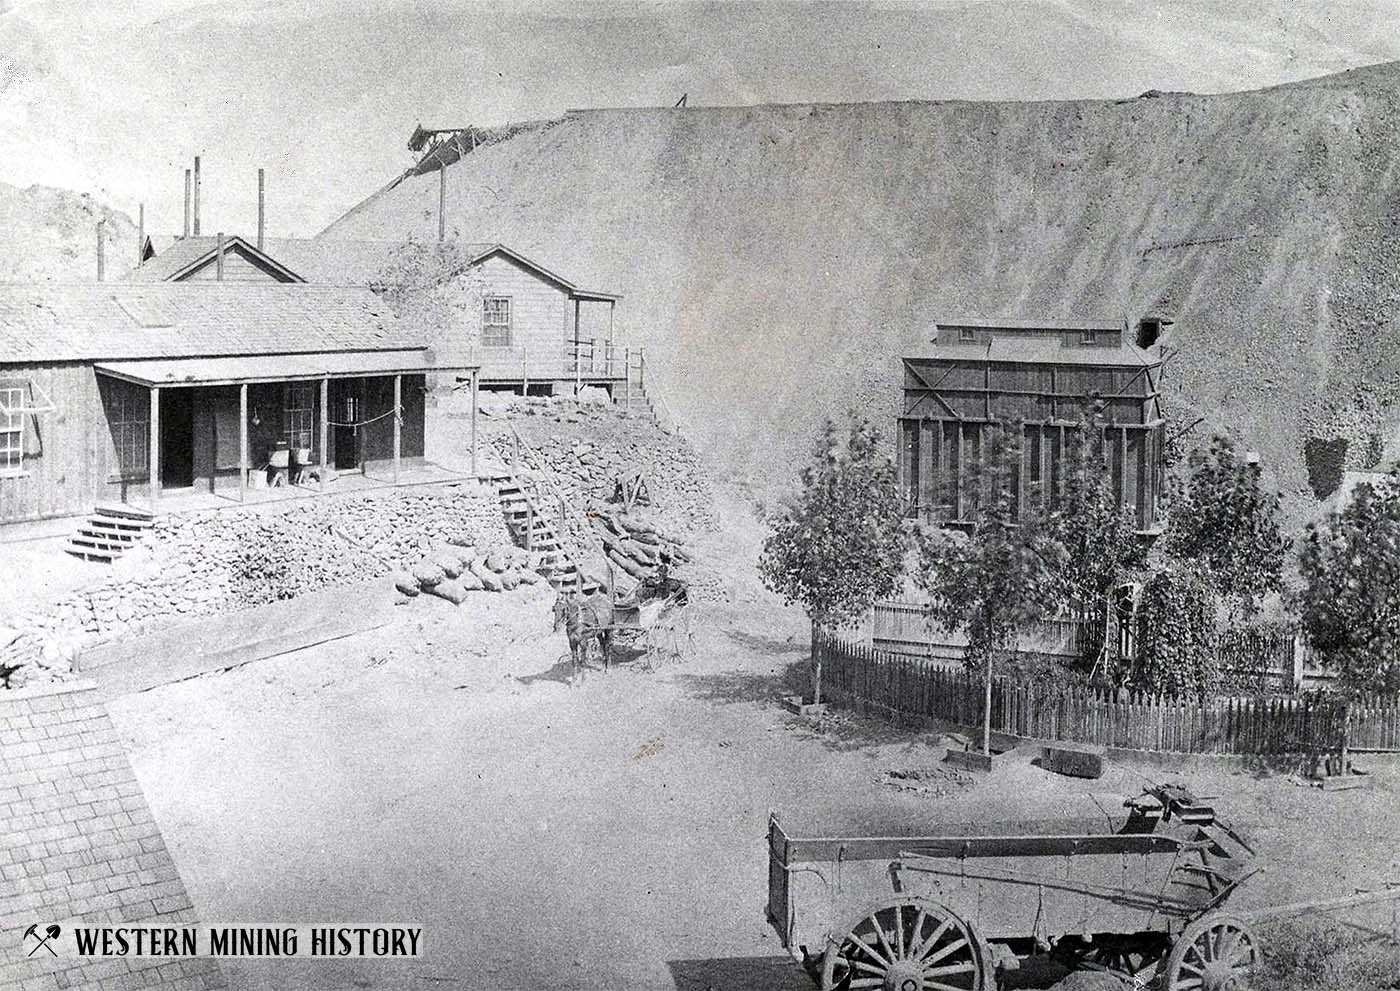 Mount Diablo mine superintendents house and assay office 1889